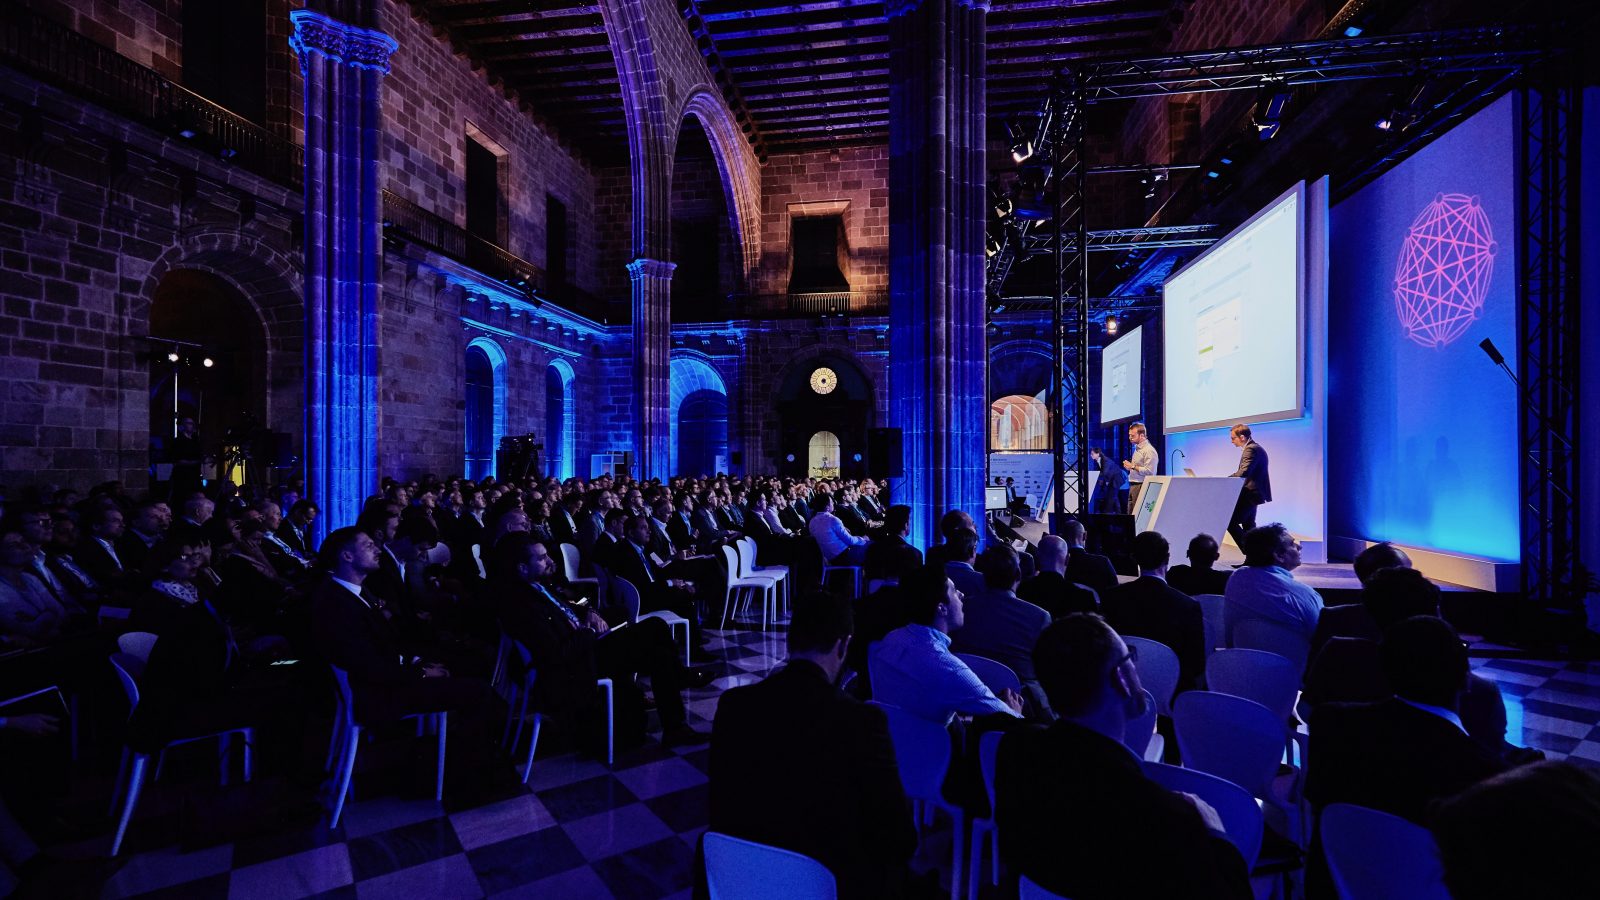 Spacious congress or conference venue with full stage and lighting setup, Barcelona, Spain